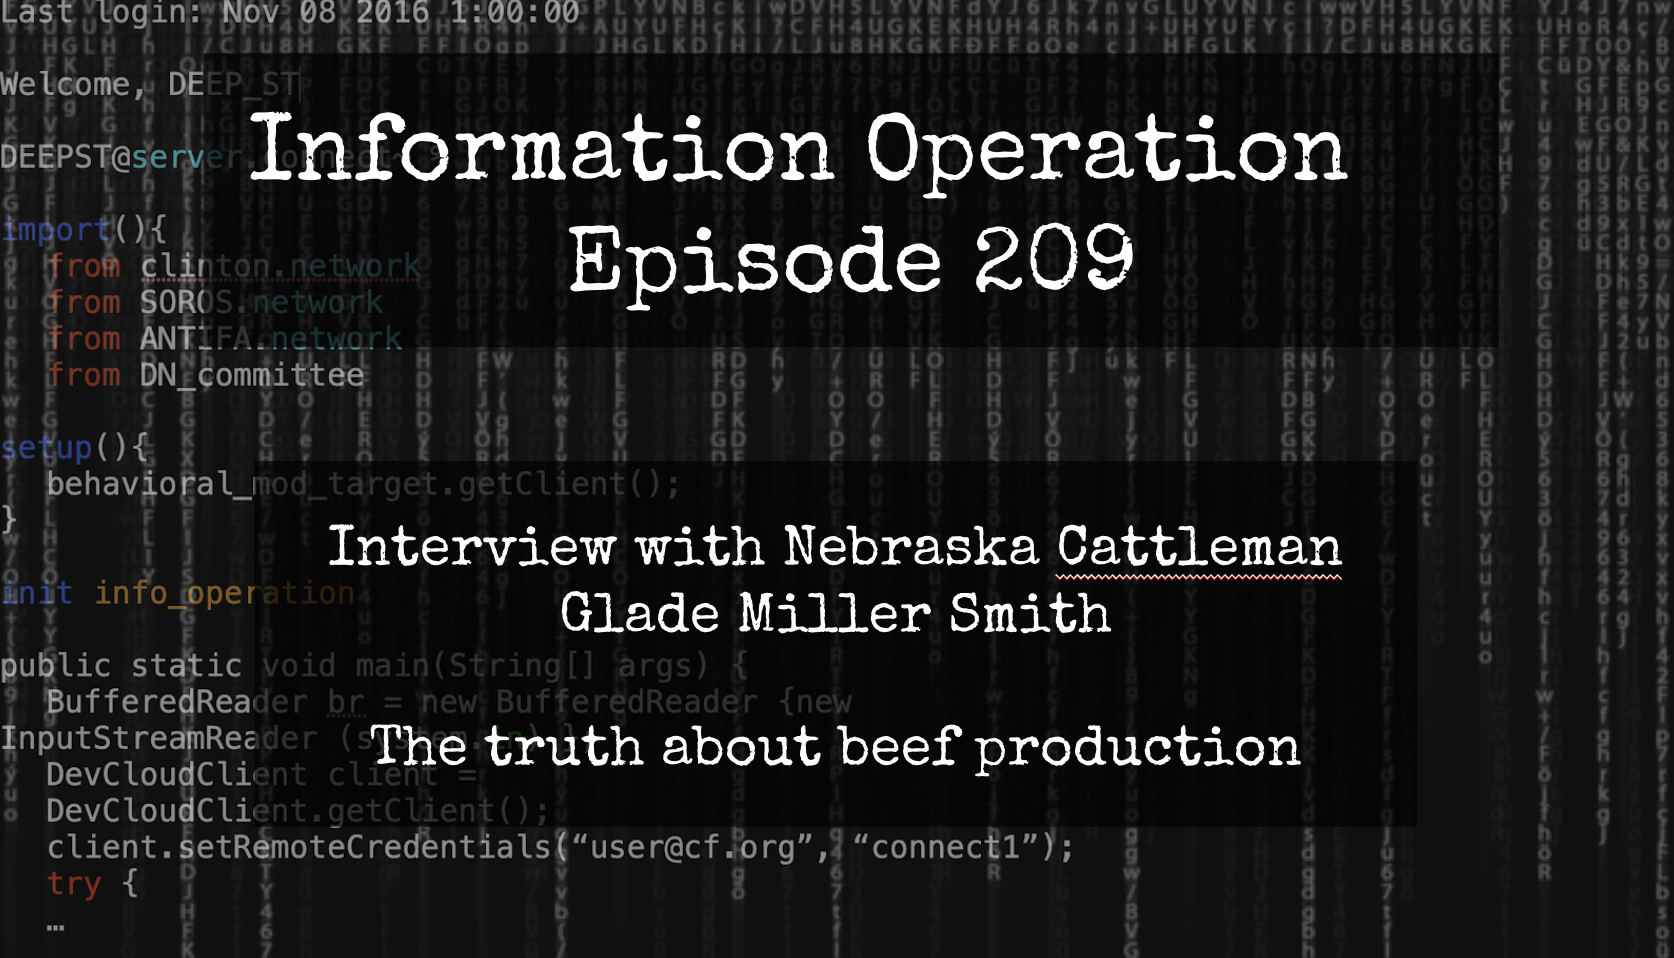 LIVE 7pm EST: IO Episode 209 - The Truth About Beef Production